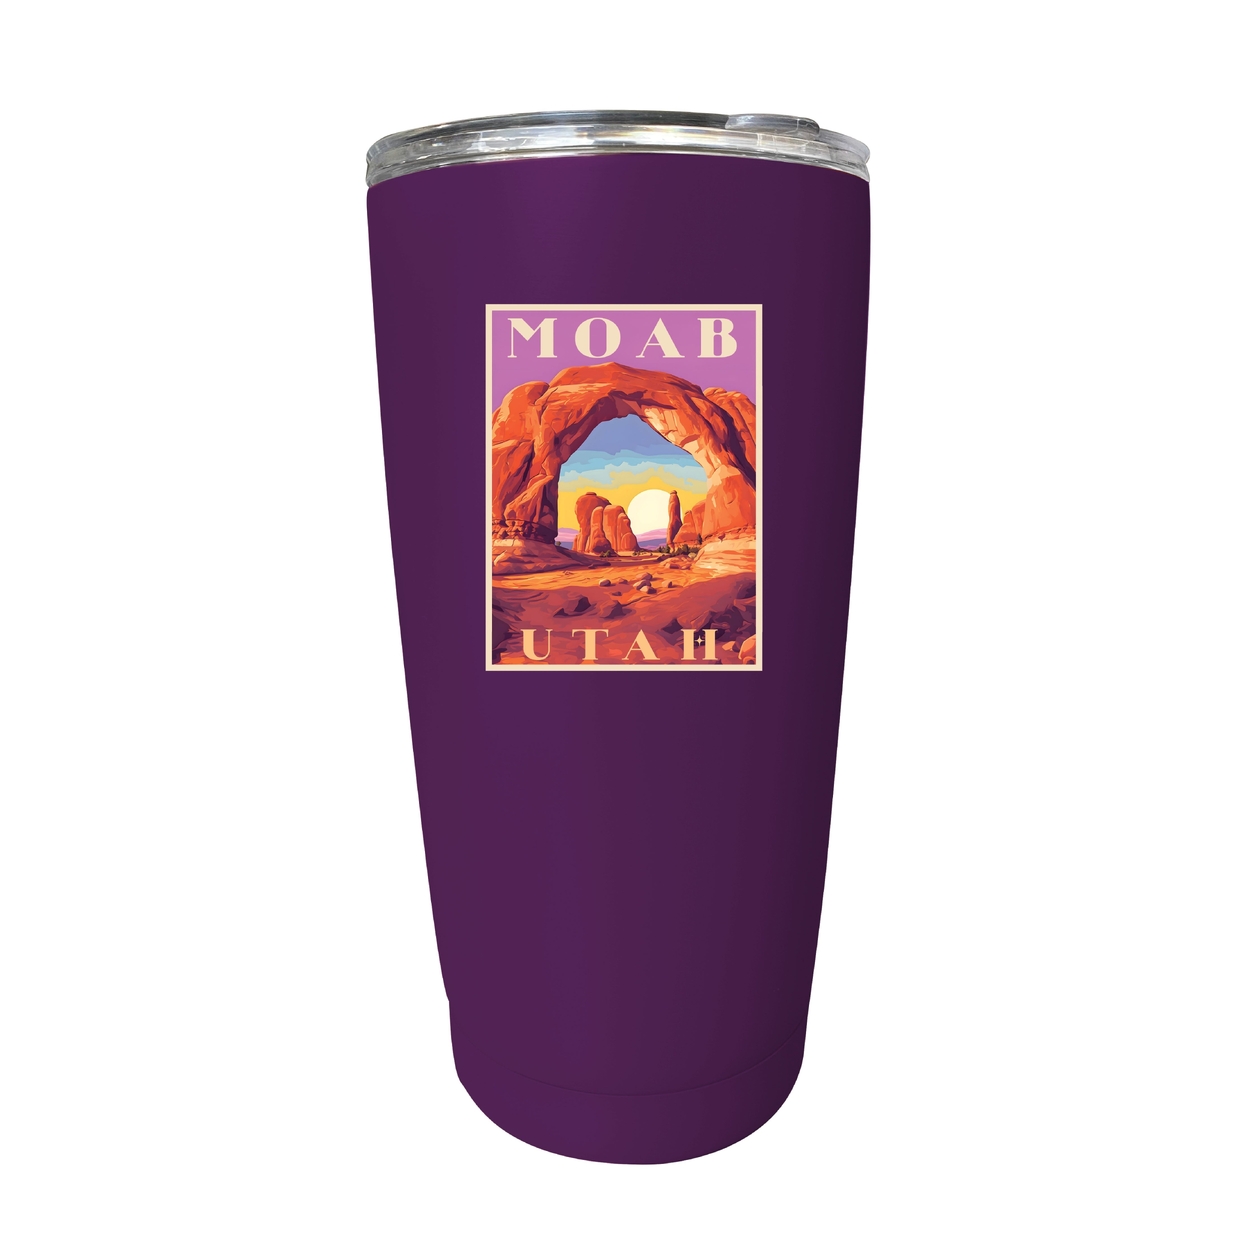 Moab Utah Souvenir 16 Oz Stainless Steel Insulated Tumbler - Stainless Steel,,2-Pack